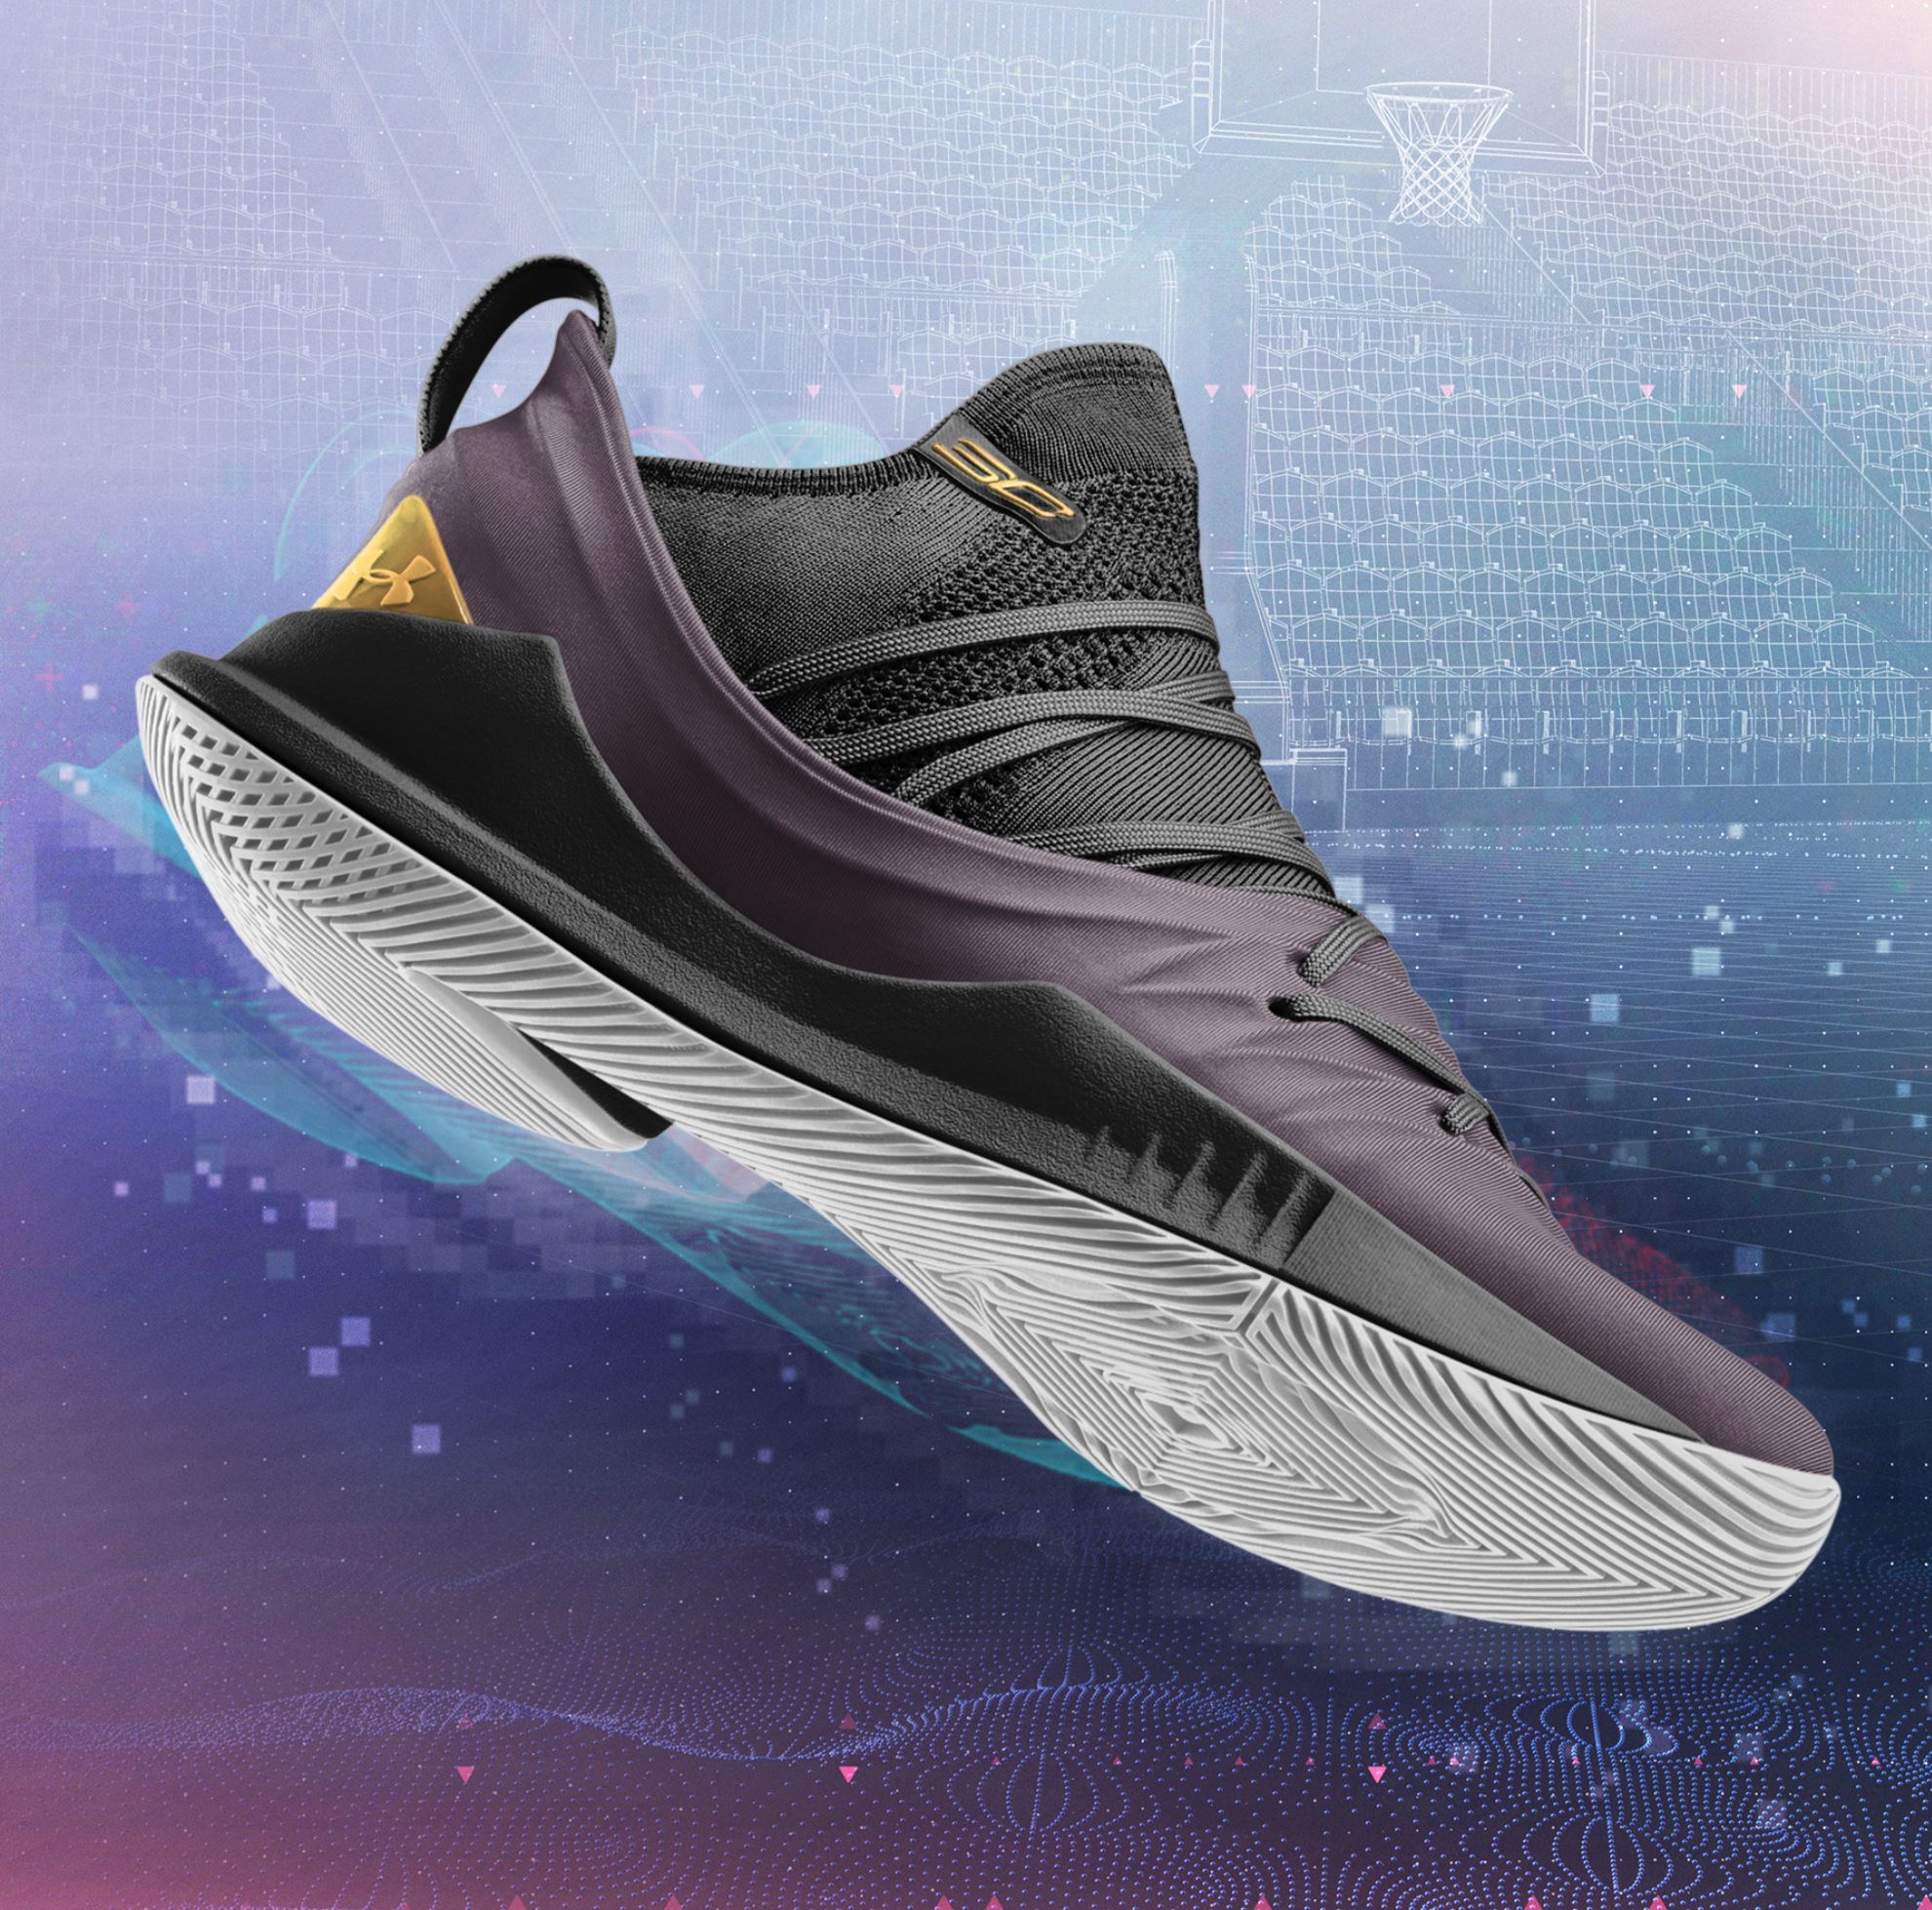 You Can Now Customize the Curry 5 on ICON - WearTesters